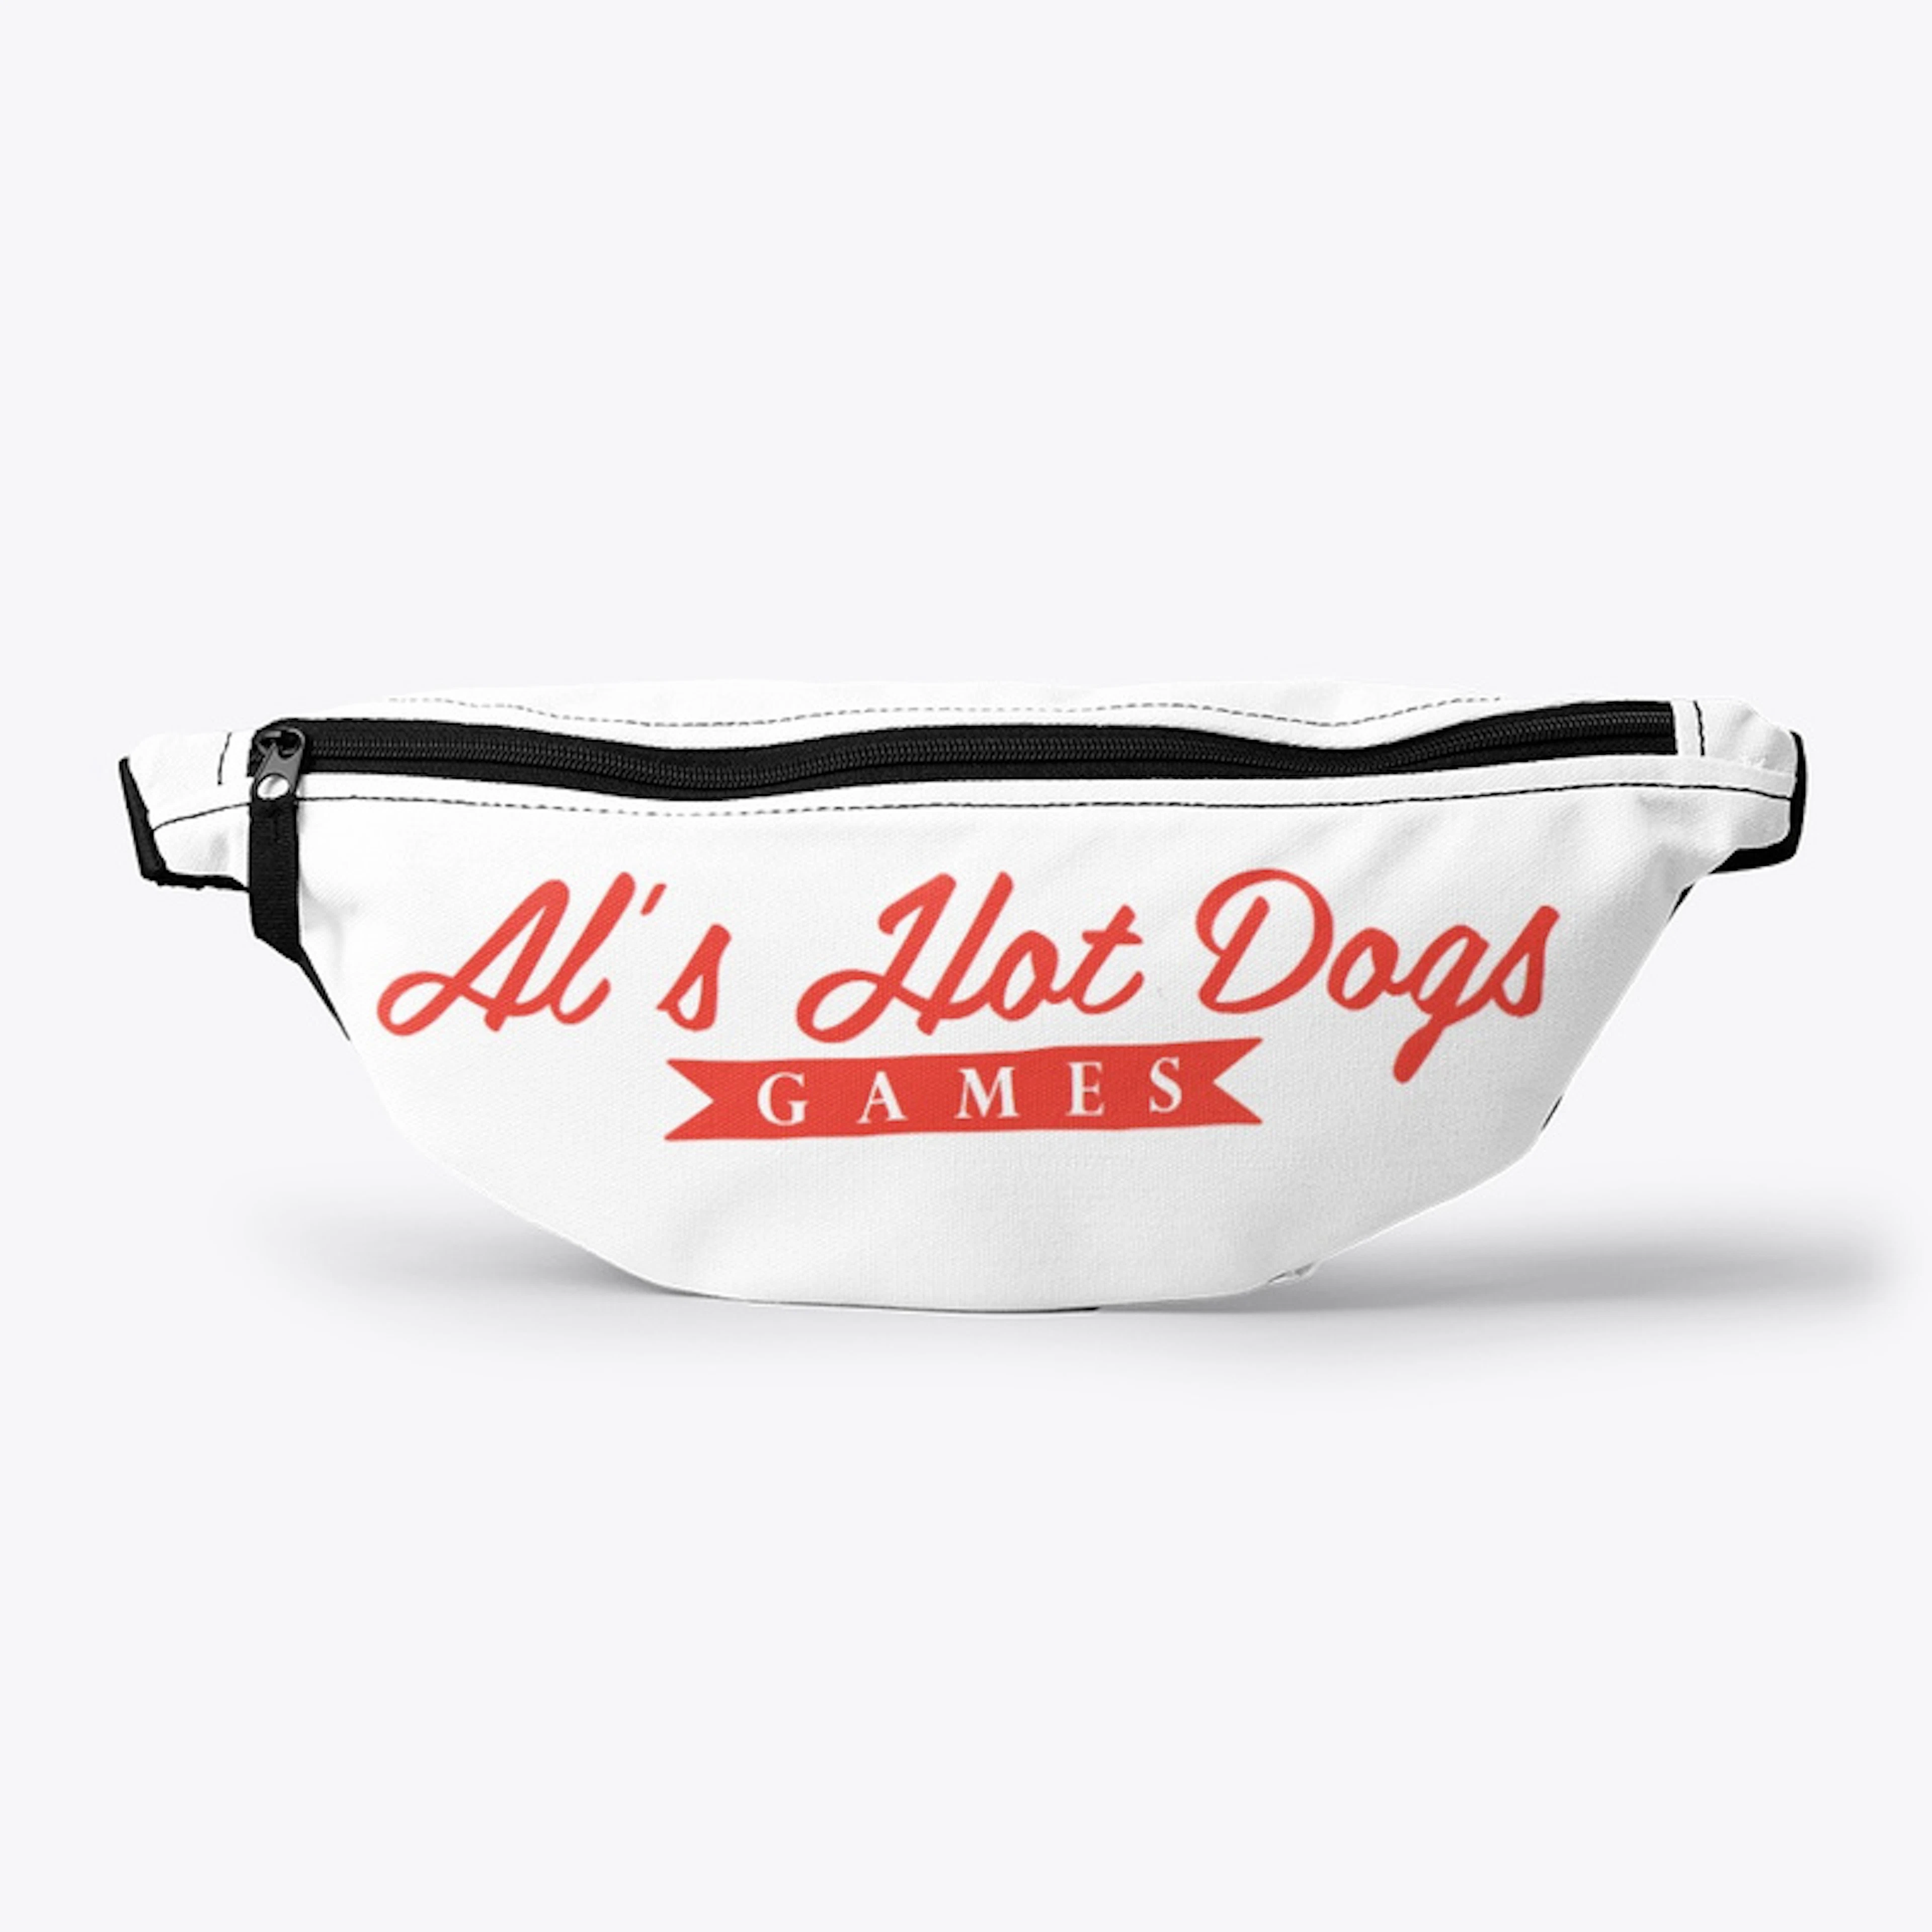 Al's Hot Dogs Games Fanny Pack